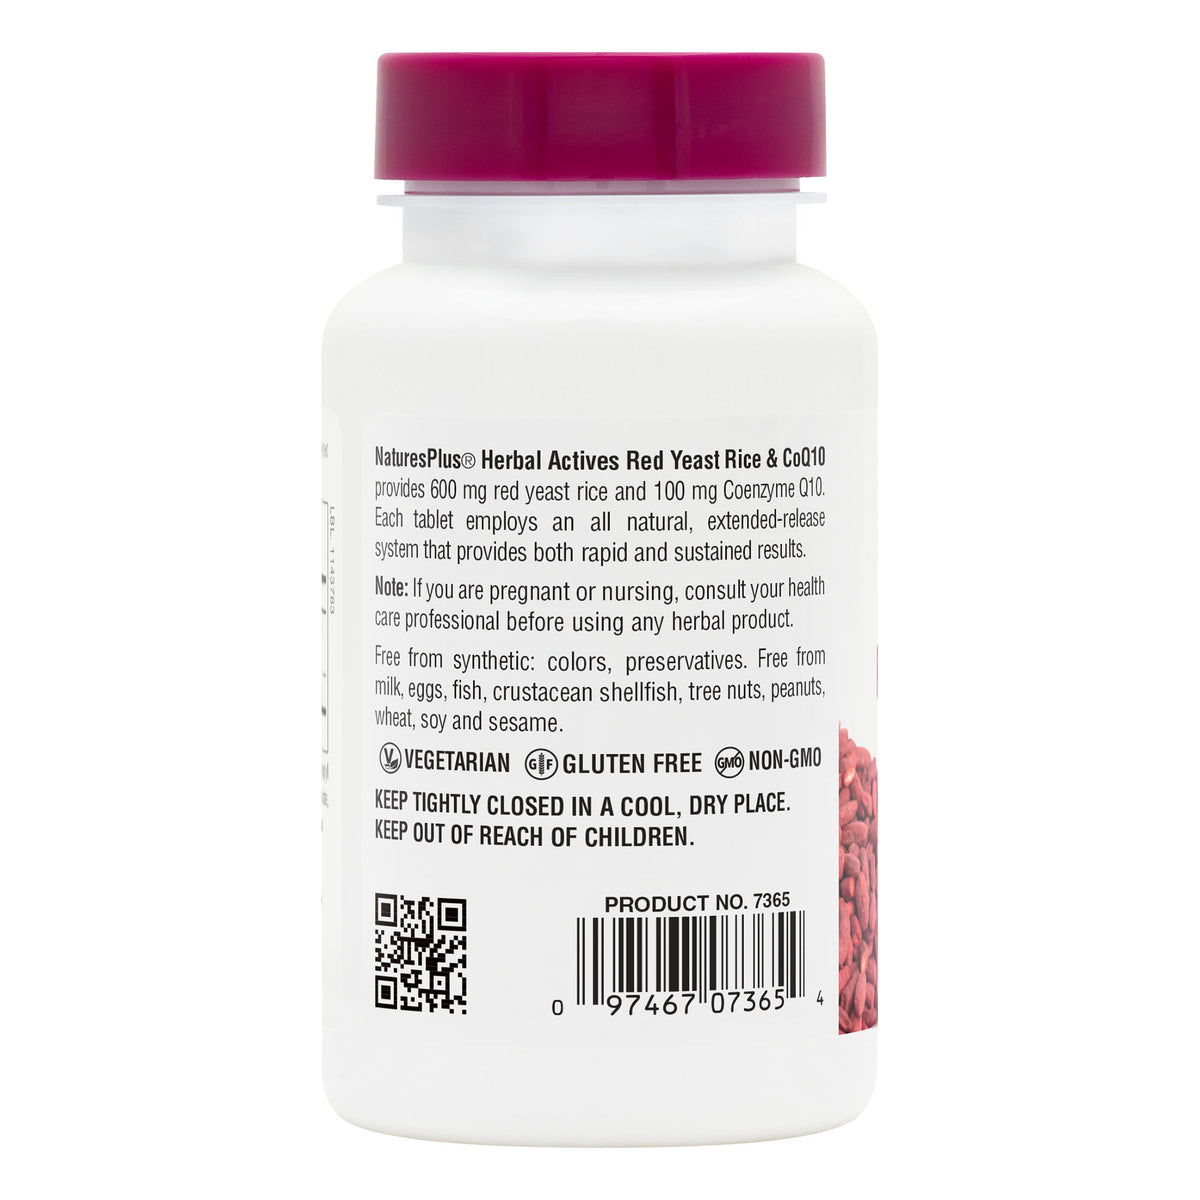 product image of Herbal Actives Red Yeast Rice 600mg/CoQ10 100mg Extended Release Tablets containing 30 Count